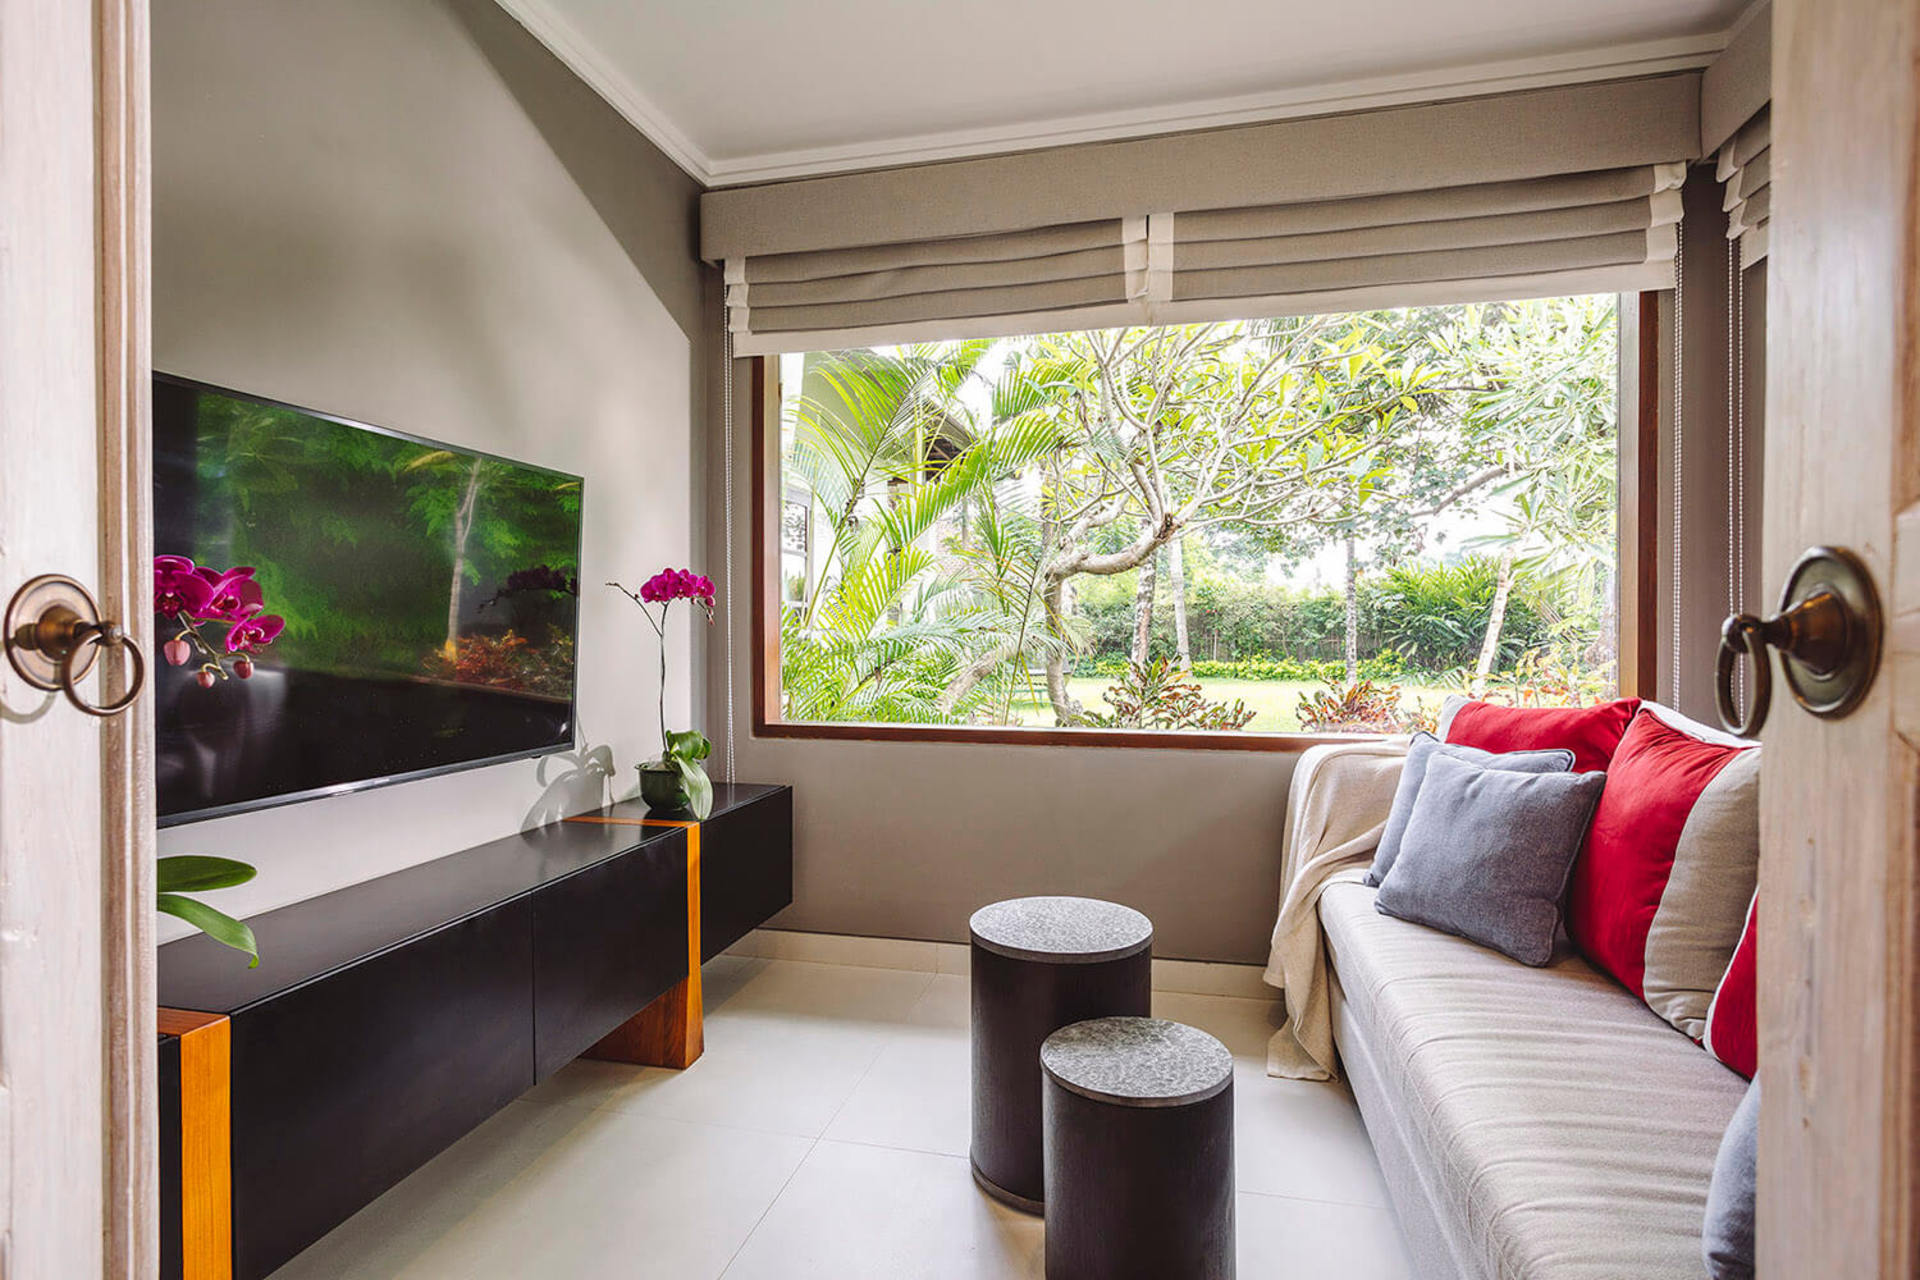 Four Bedroom Villa in Bali, Minutes from the Beach